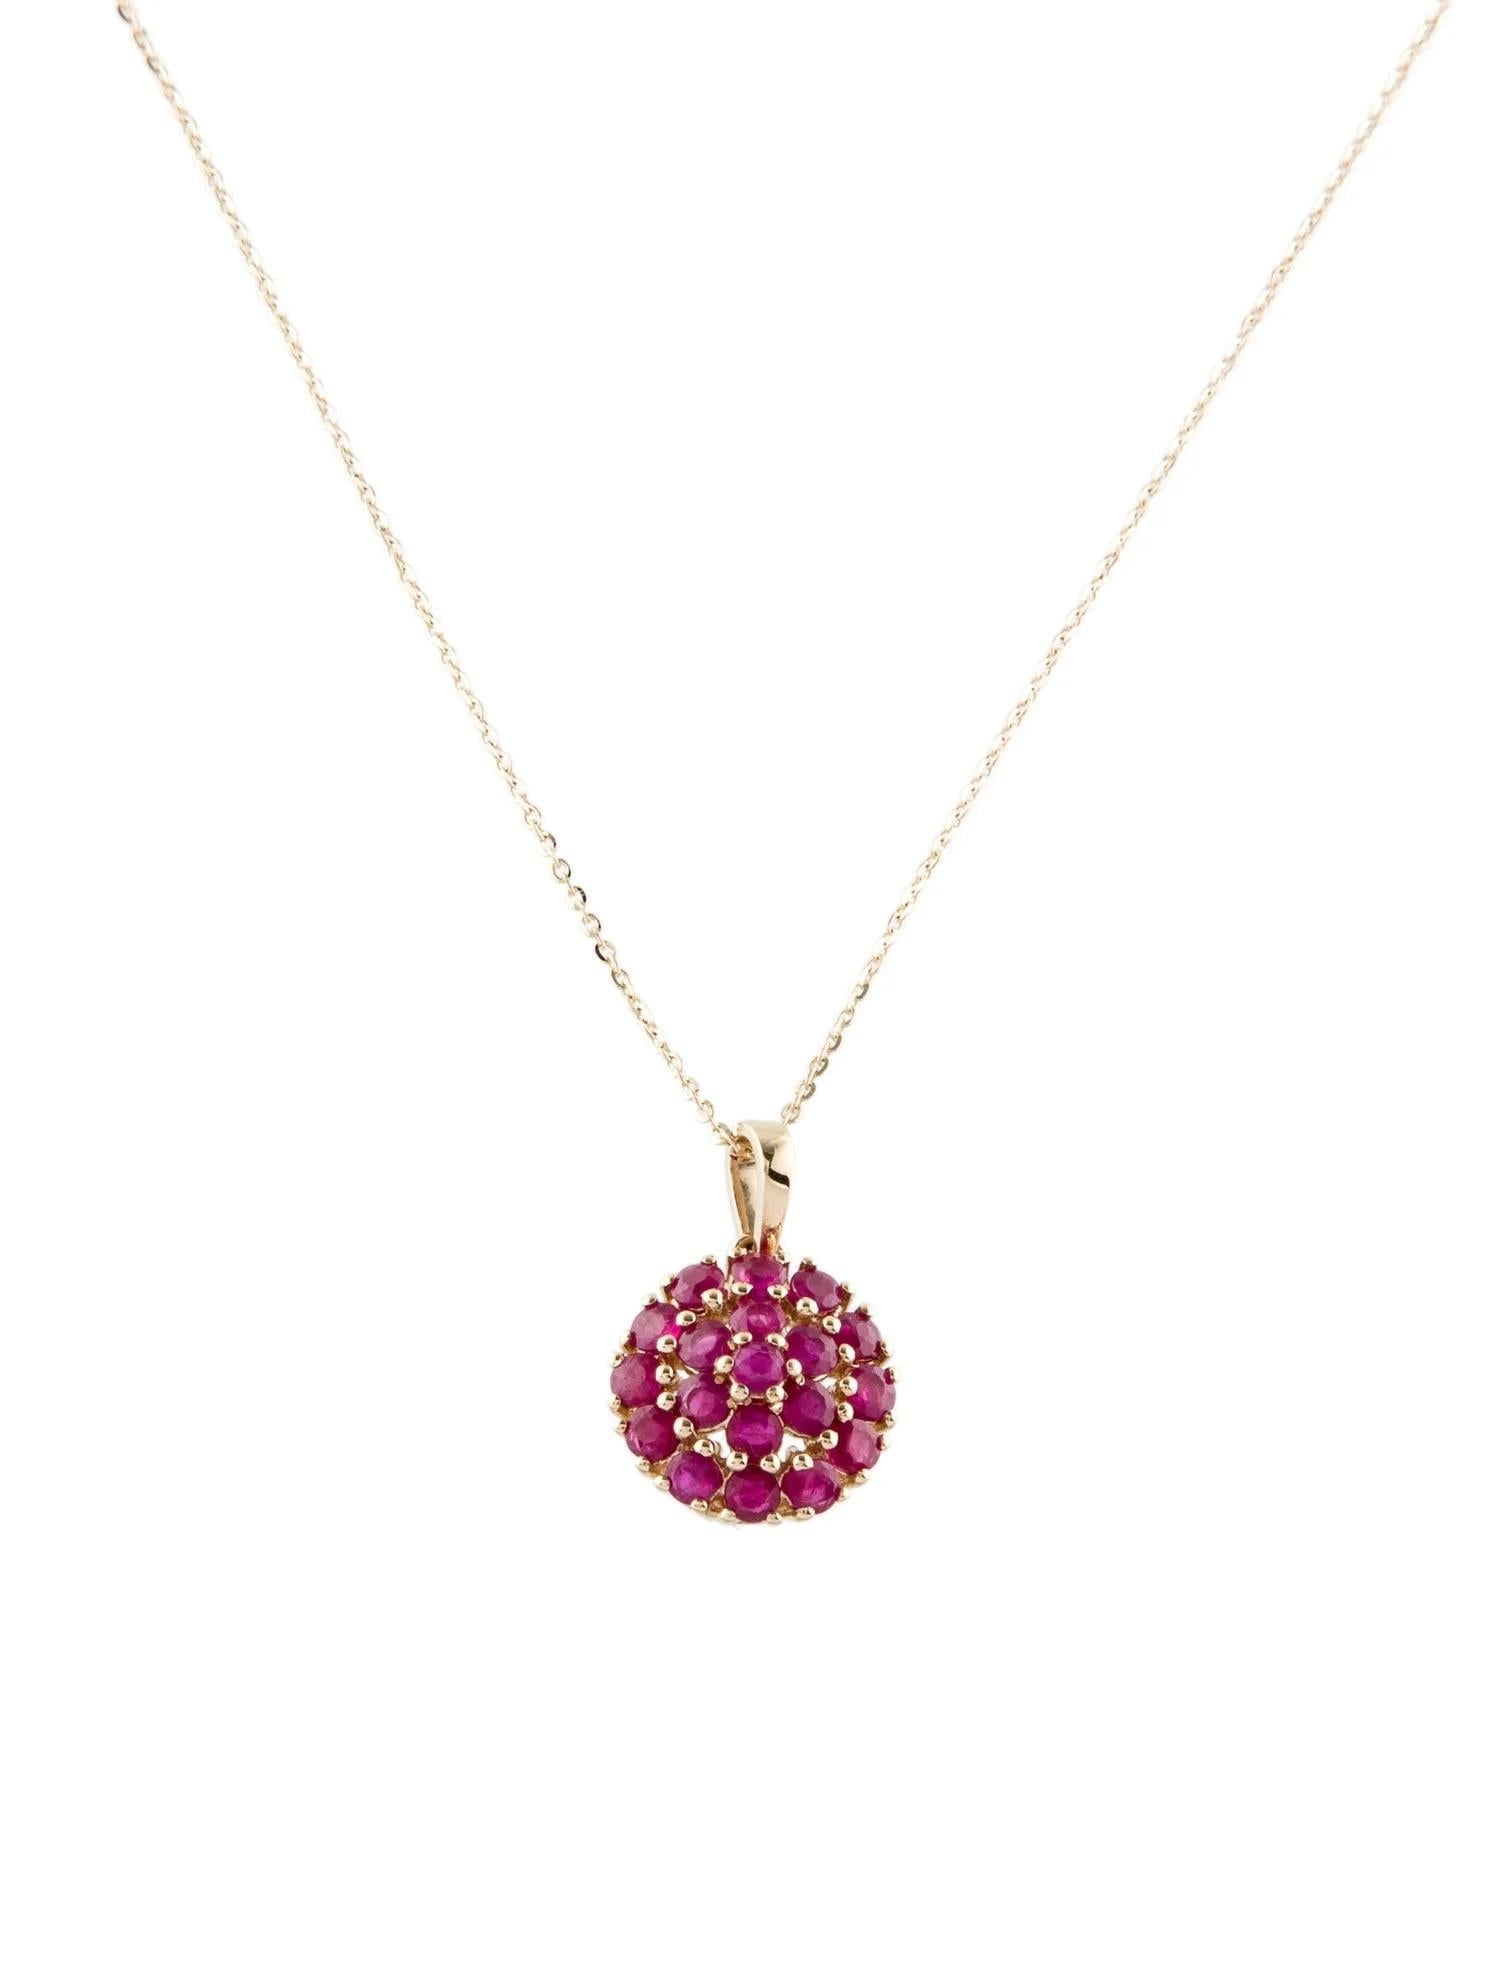 Round Cut 14K Ruby Pendant Necklace  1.29 Carat Round Faceted Ruby  Yellow Gold For Sale